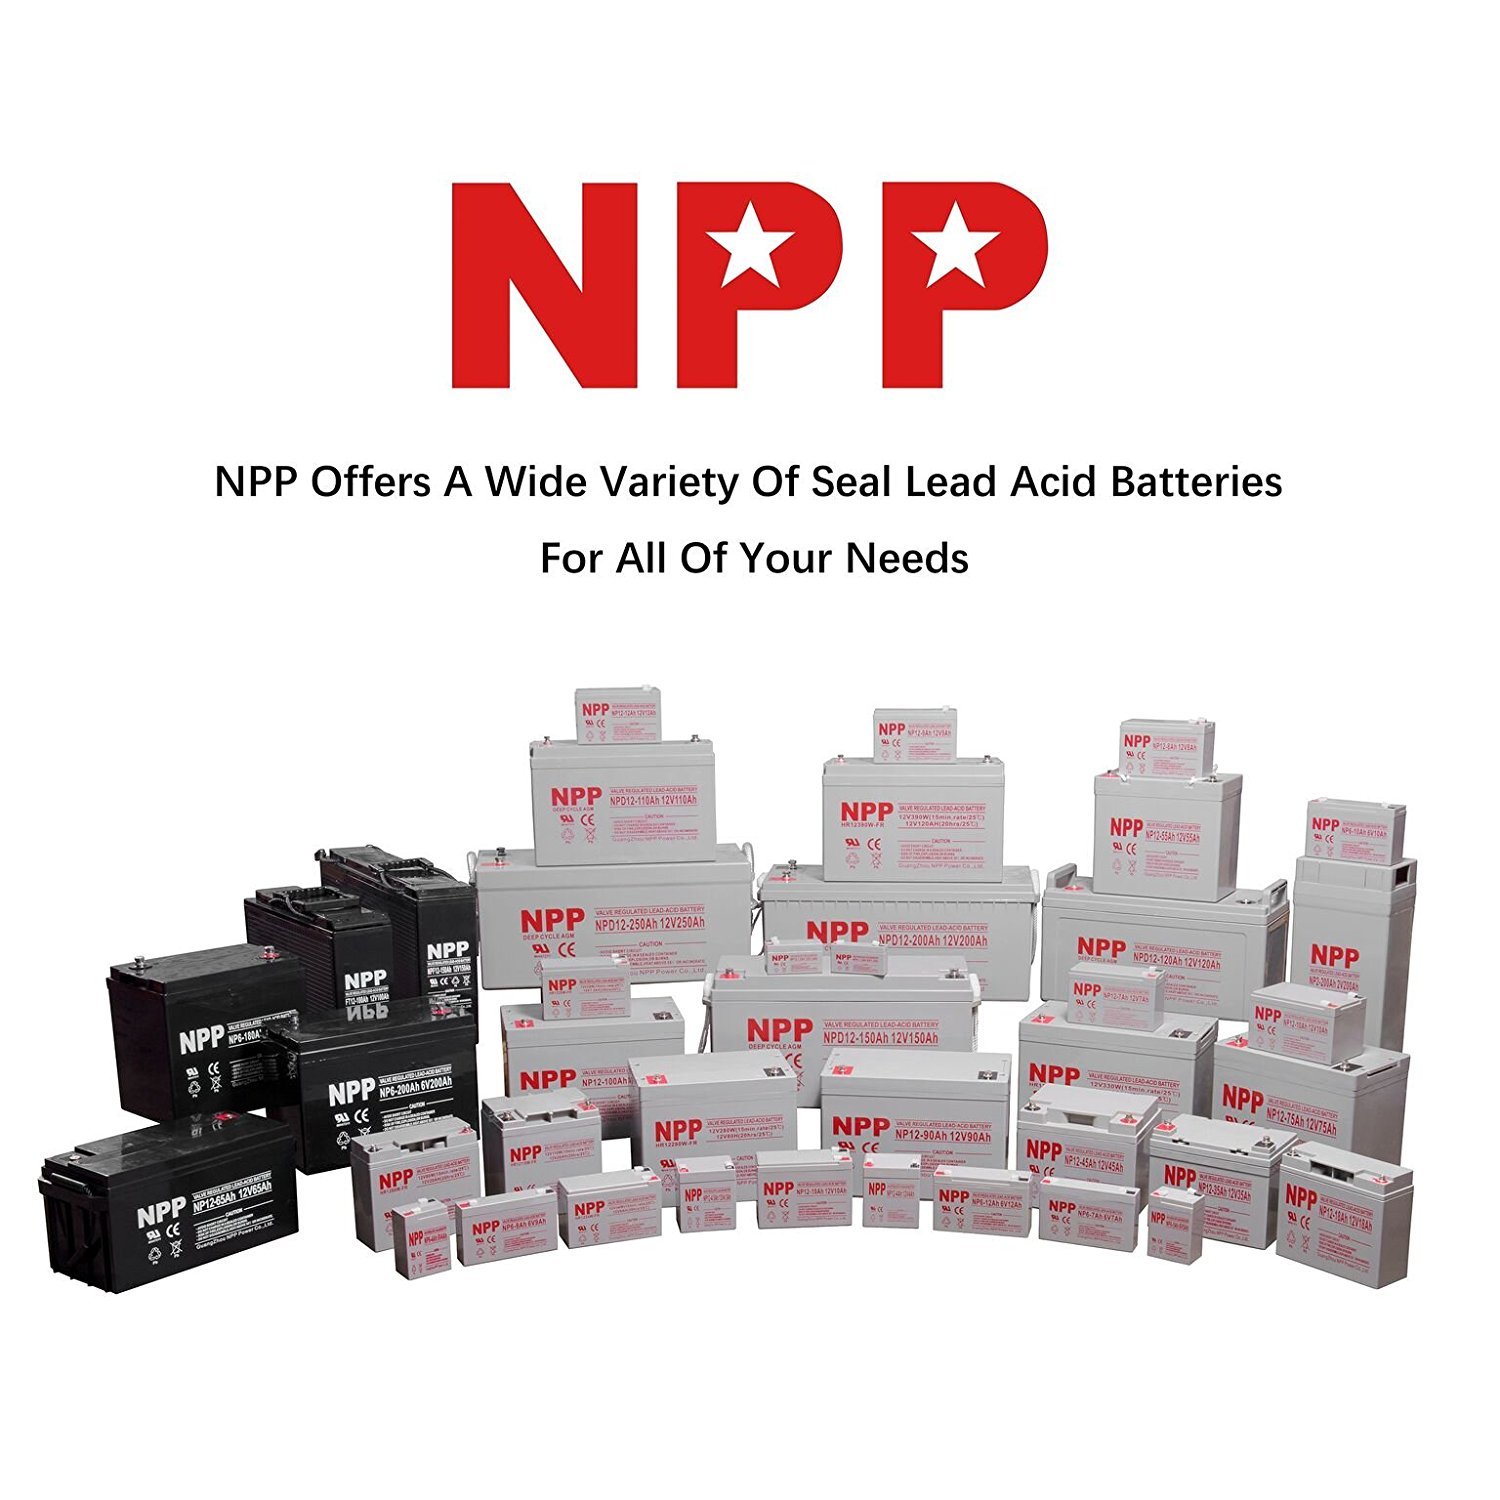 NPD12-200Ah 12V 200Ah AGM Deep Cycle Rechargeable Battery, 1200+ Deep Cycle 200Ah Battery, Safe Charger for Most Home Appliances, RV, Camping, Cabin, Marine, UPC, Trolling Motor and Off-Grid System